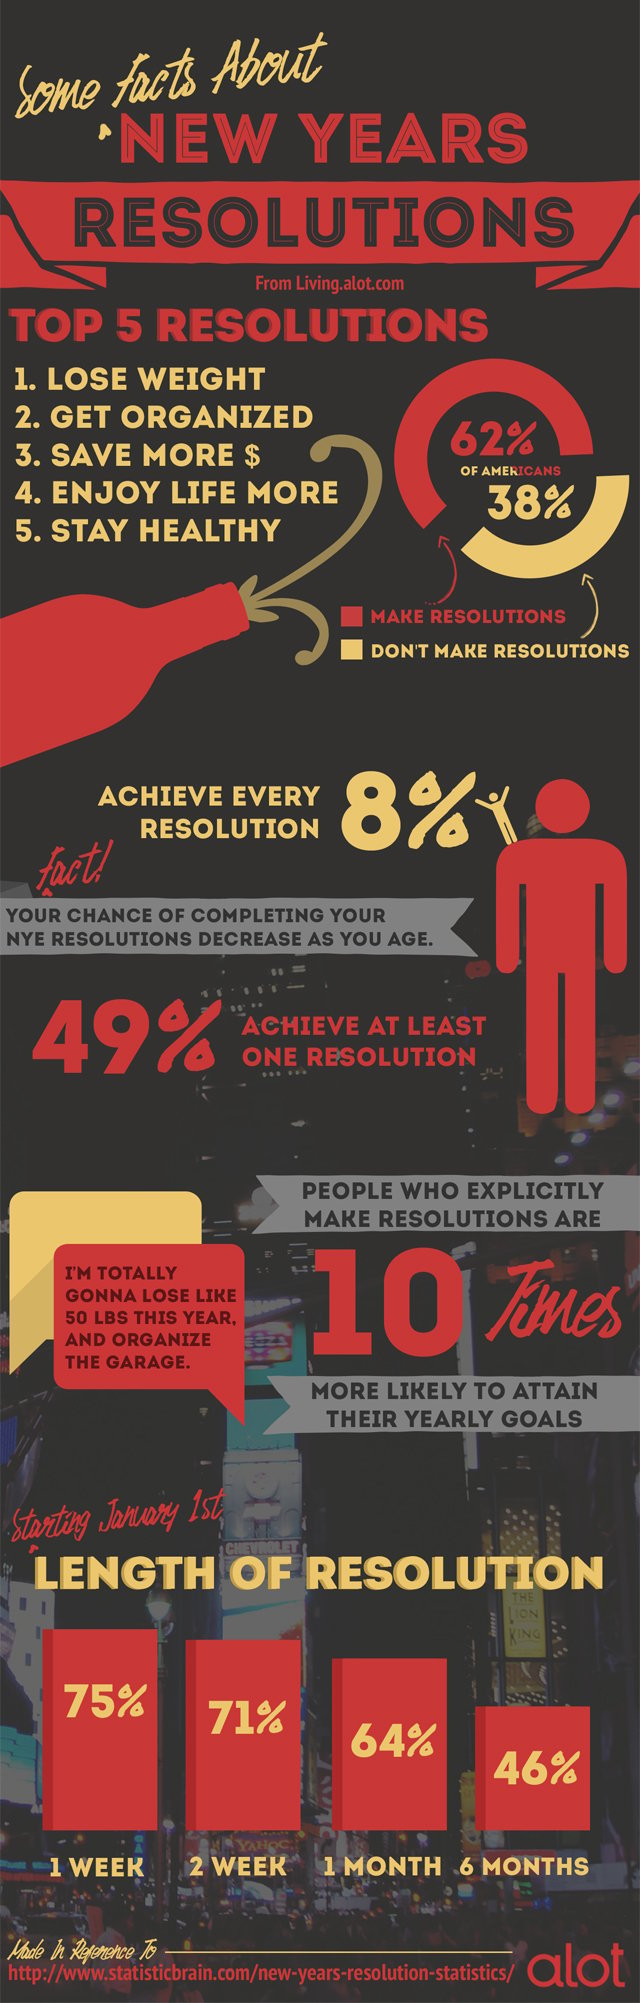 New Year's Resolution Facts